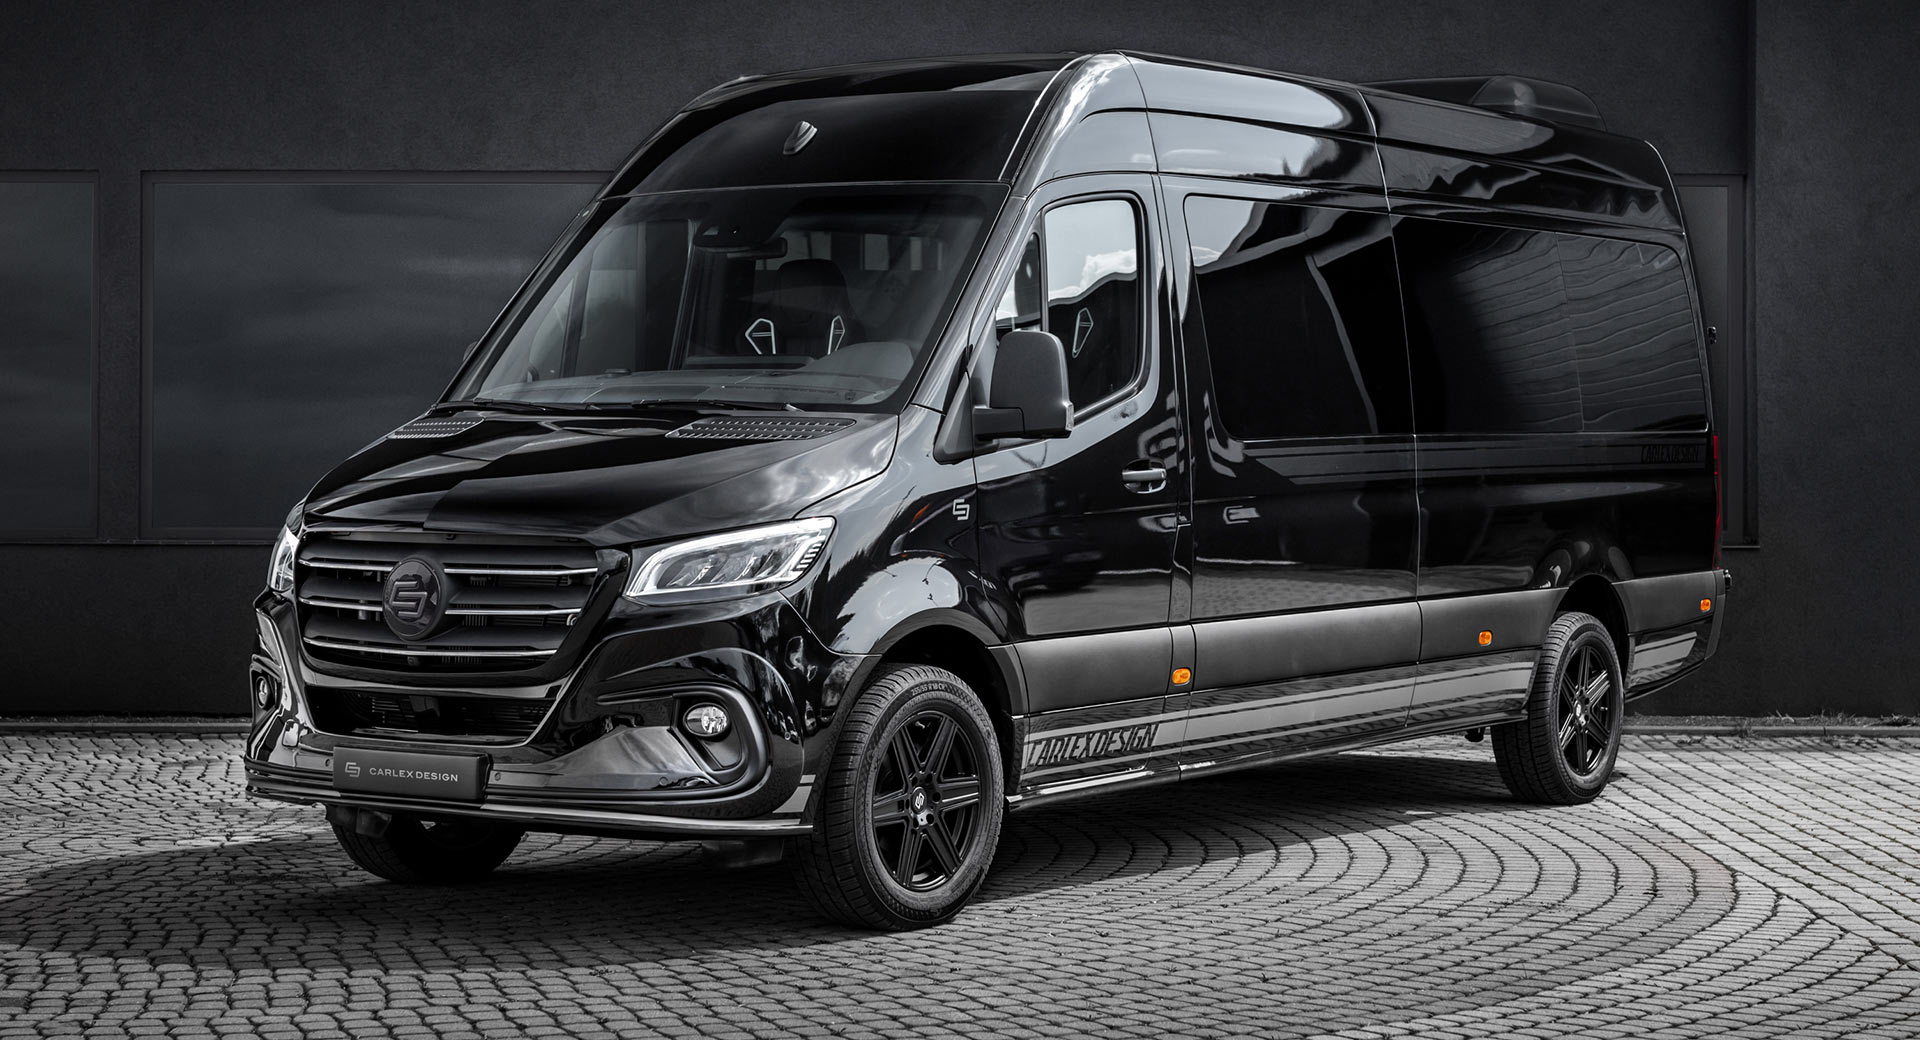 Carlex Design's Spiced Up Mercedes-Benz Sprinter Comes With A Lofty Price |  Carscoops